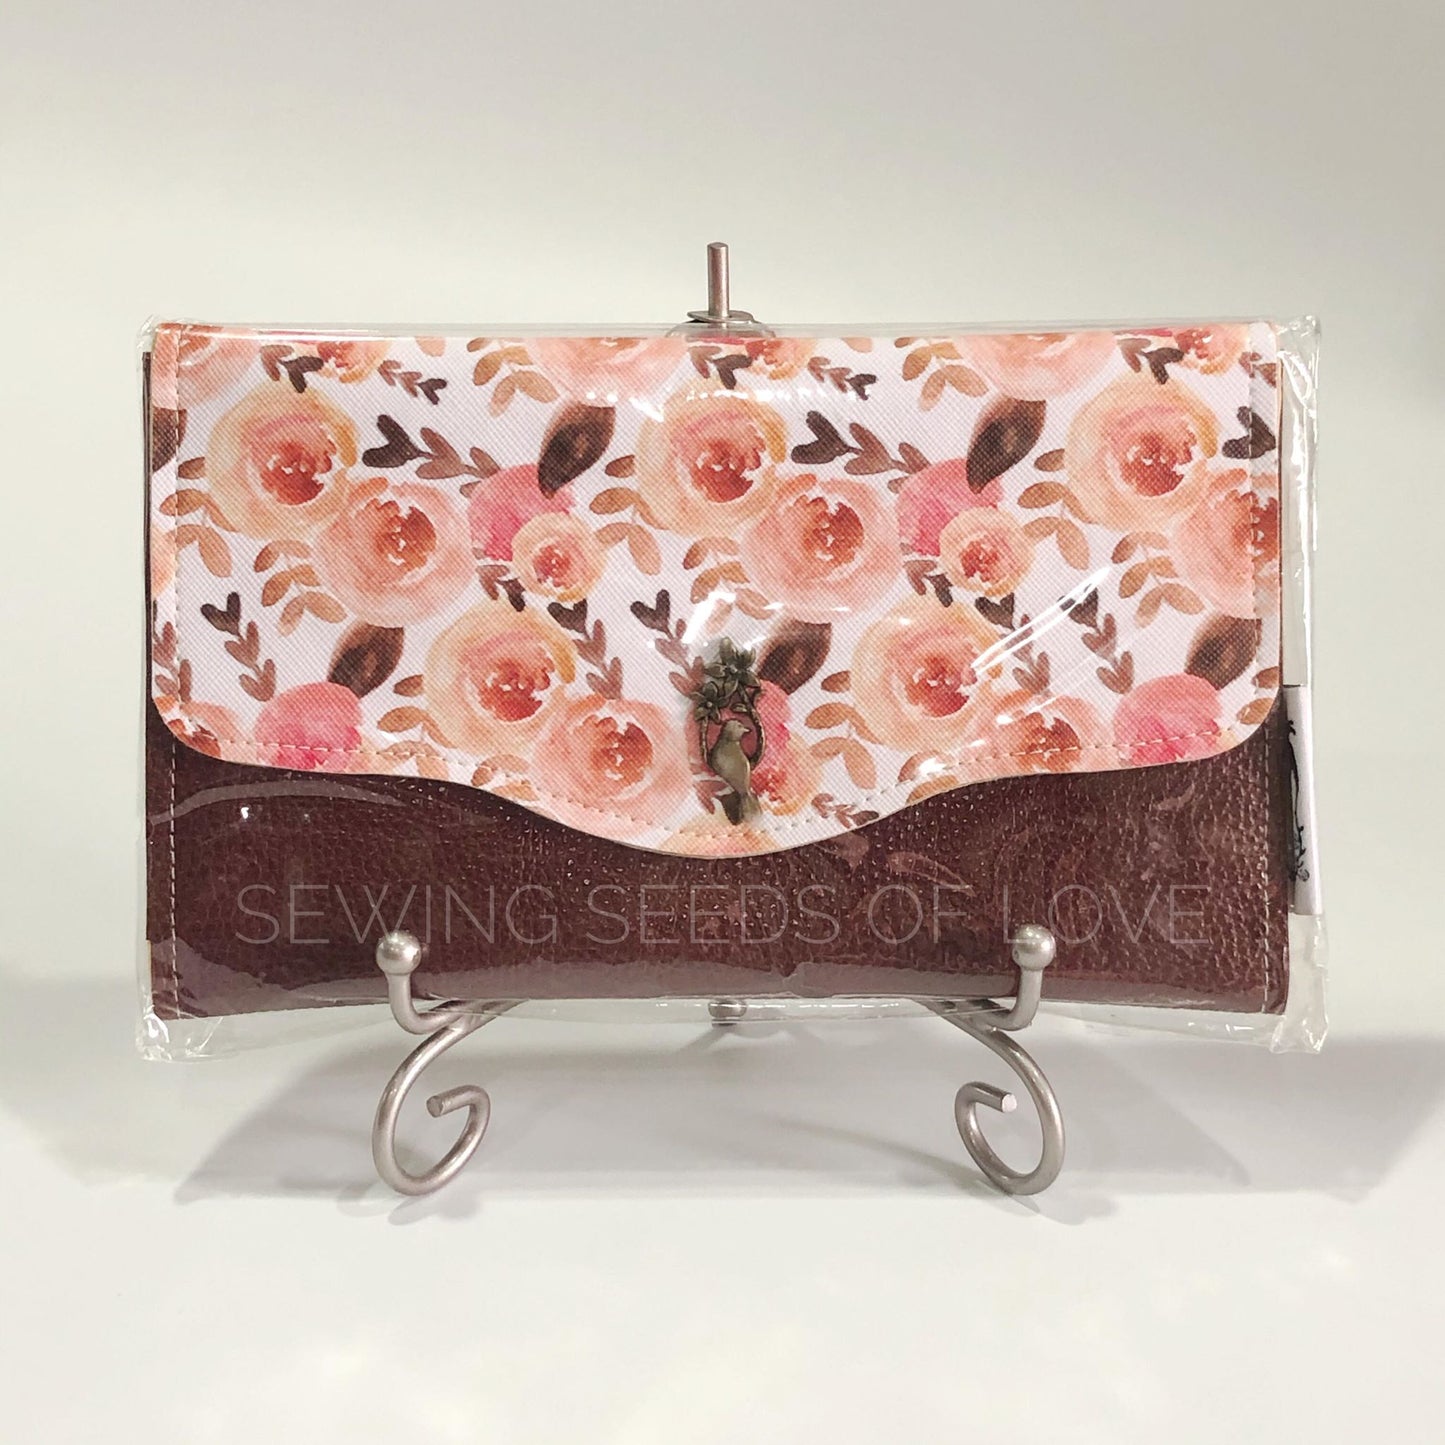 Vinyl Angbao Clutch - Coral Roses